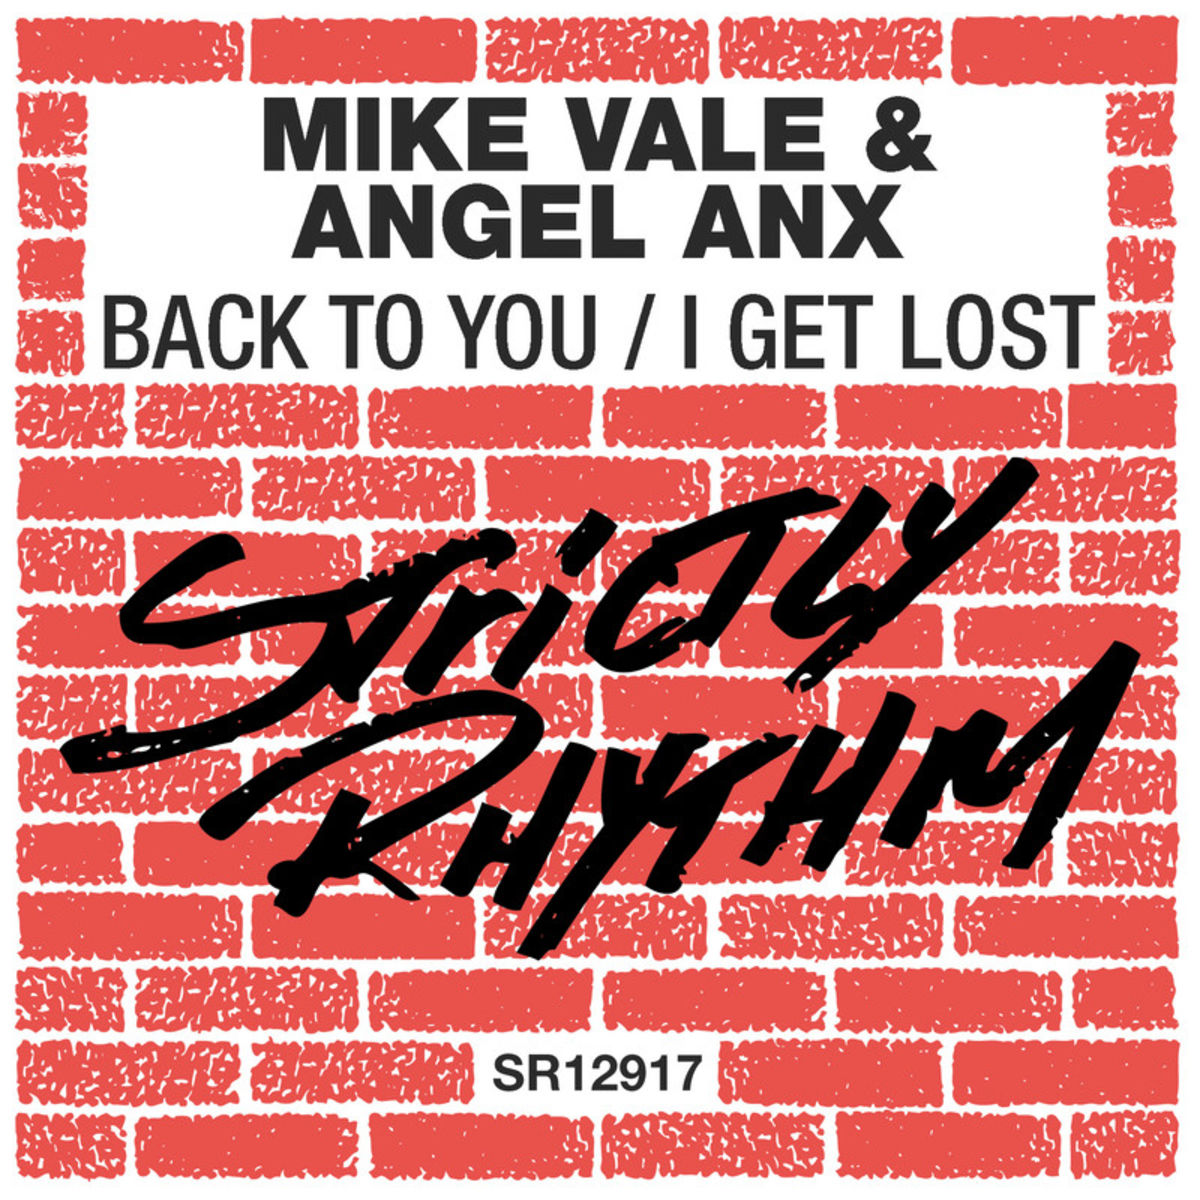 Mike Vale & Angel Anx - Back to You / Strictly Rhythm Records